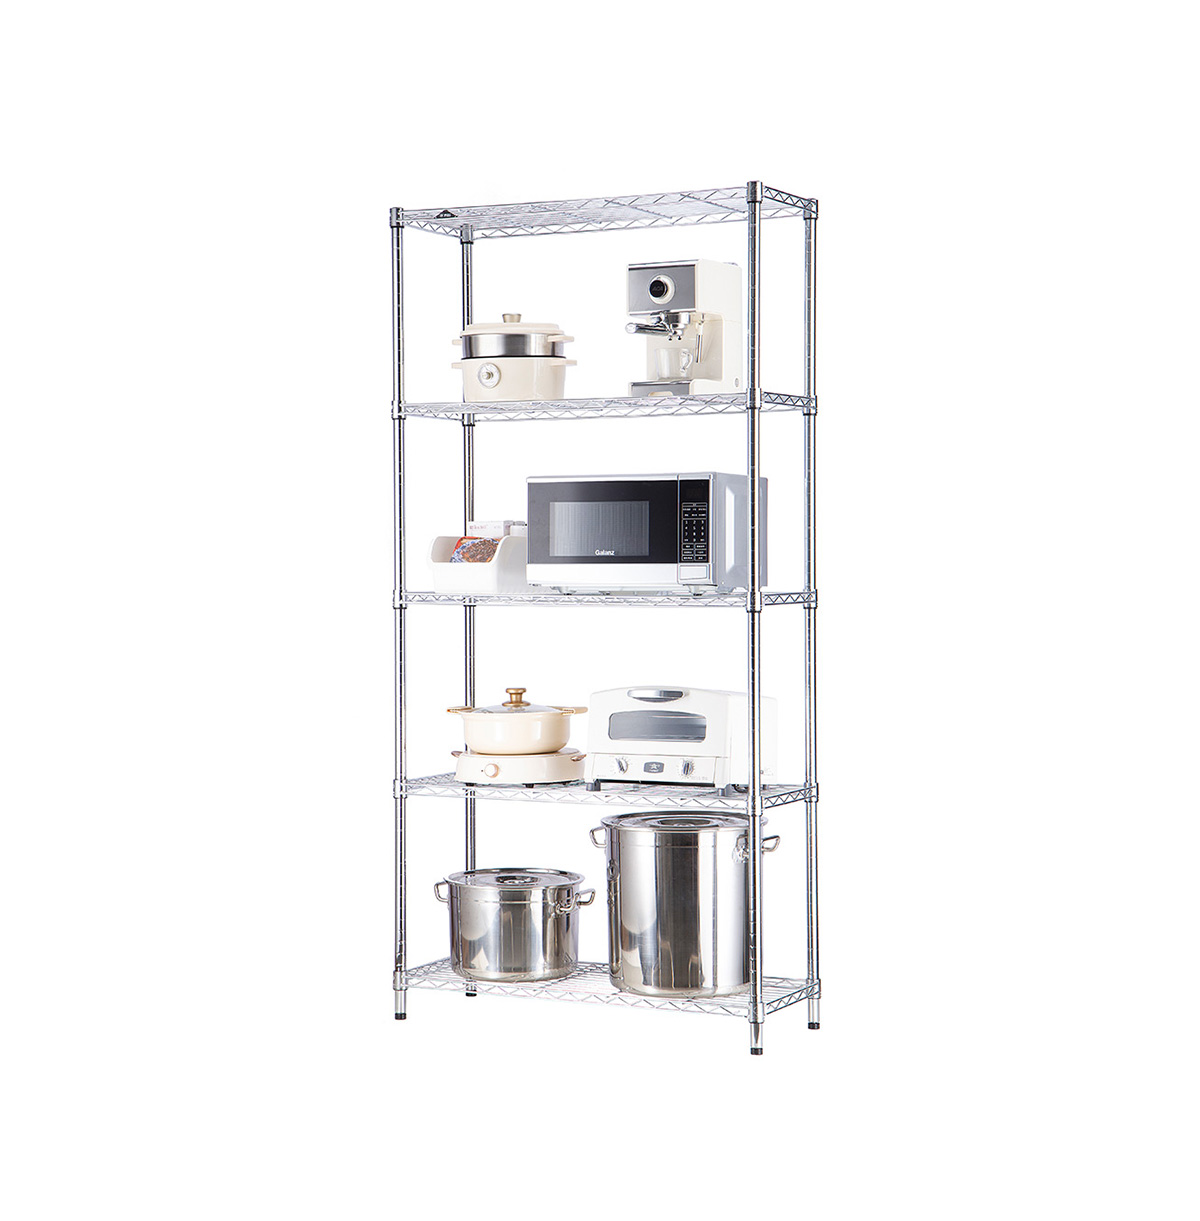 MZG Steel Storage Shelving 5-Tier Wide, Chrome